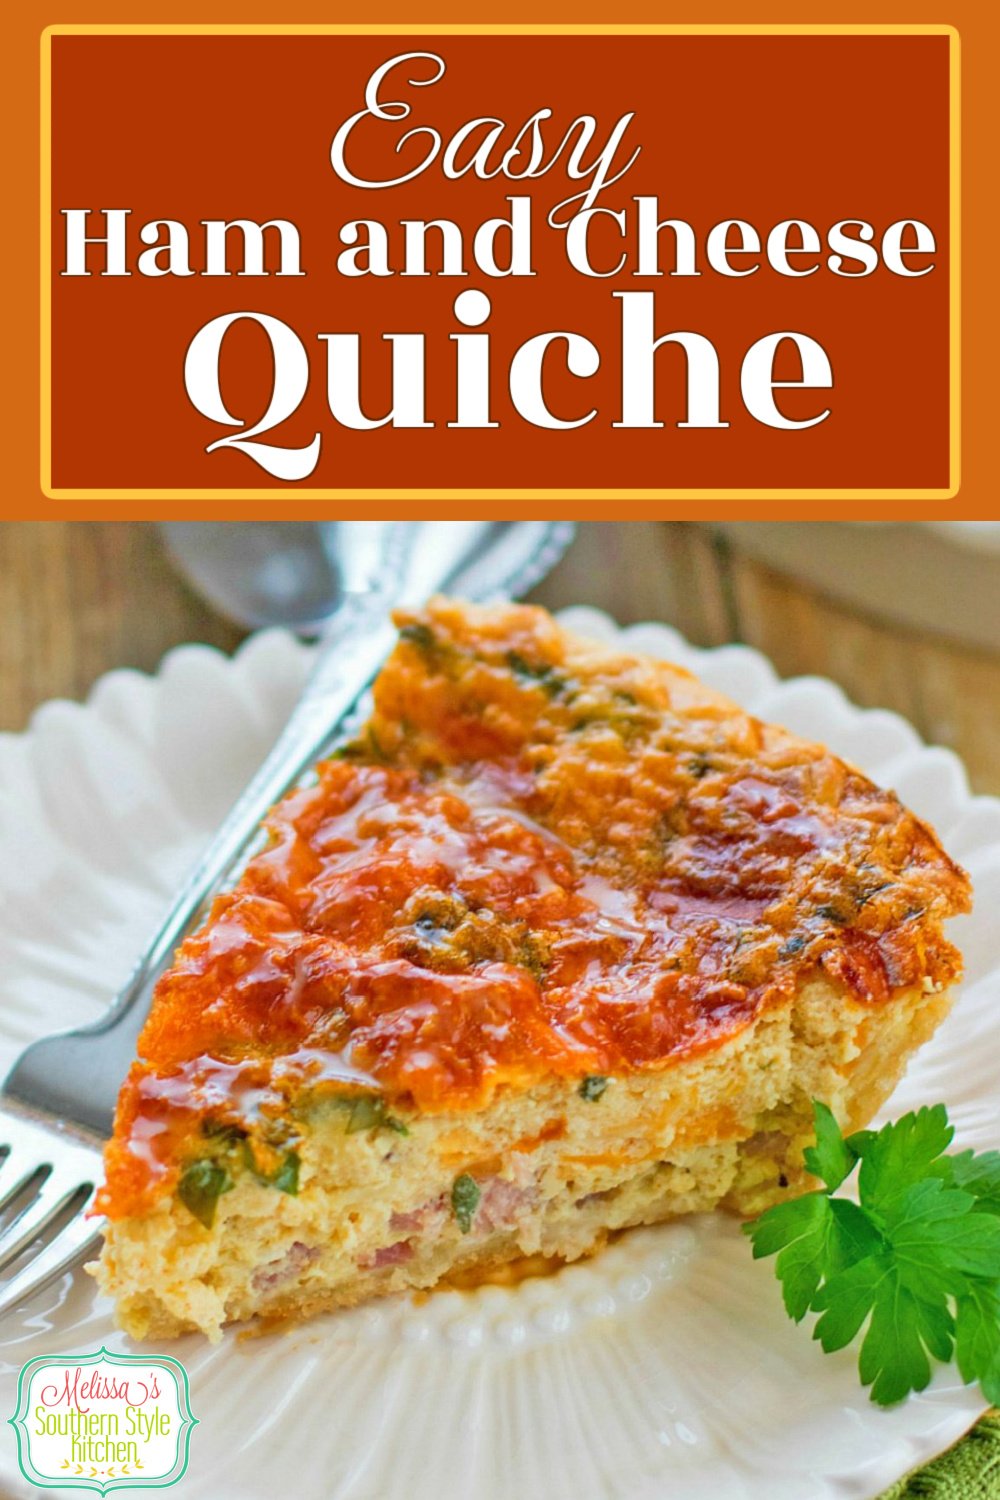 This Easy Ham and Cheese Quiche recipe is simple to make with everyday ingredients or a delicious way to use leftover holiday ham. #hamquiche #hamadcheesequiche #easyquicerecipe #leftoverhamrecipes #holidayhamrecipes #hamandcheese #hamrecipes via @melissasssk